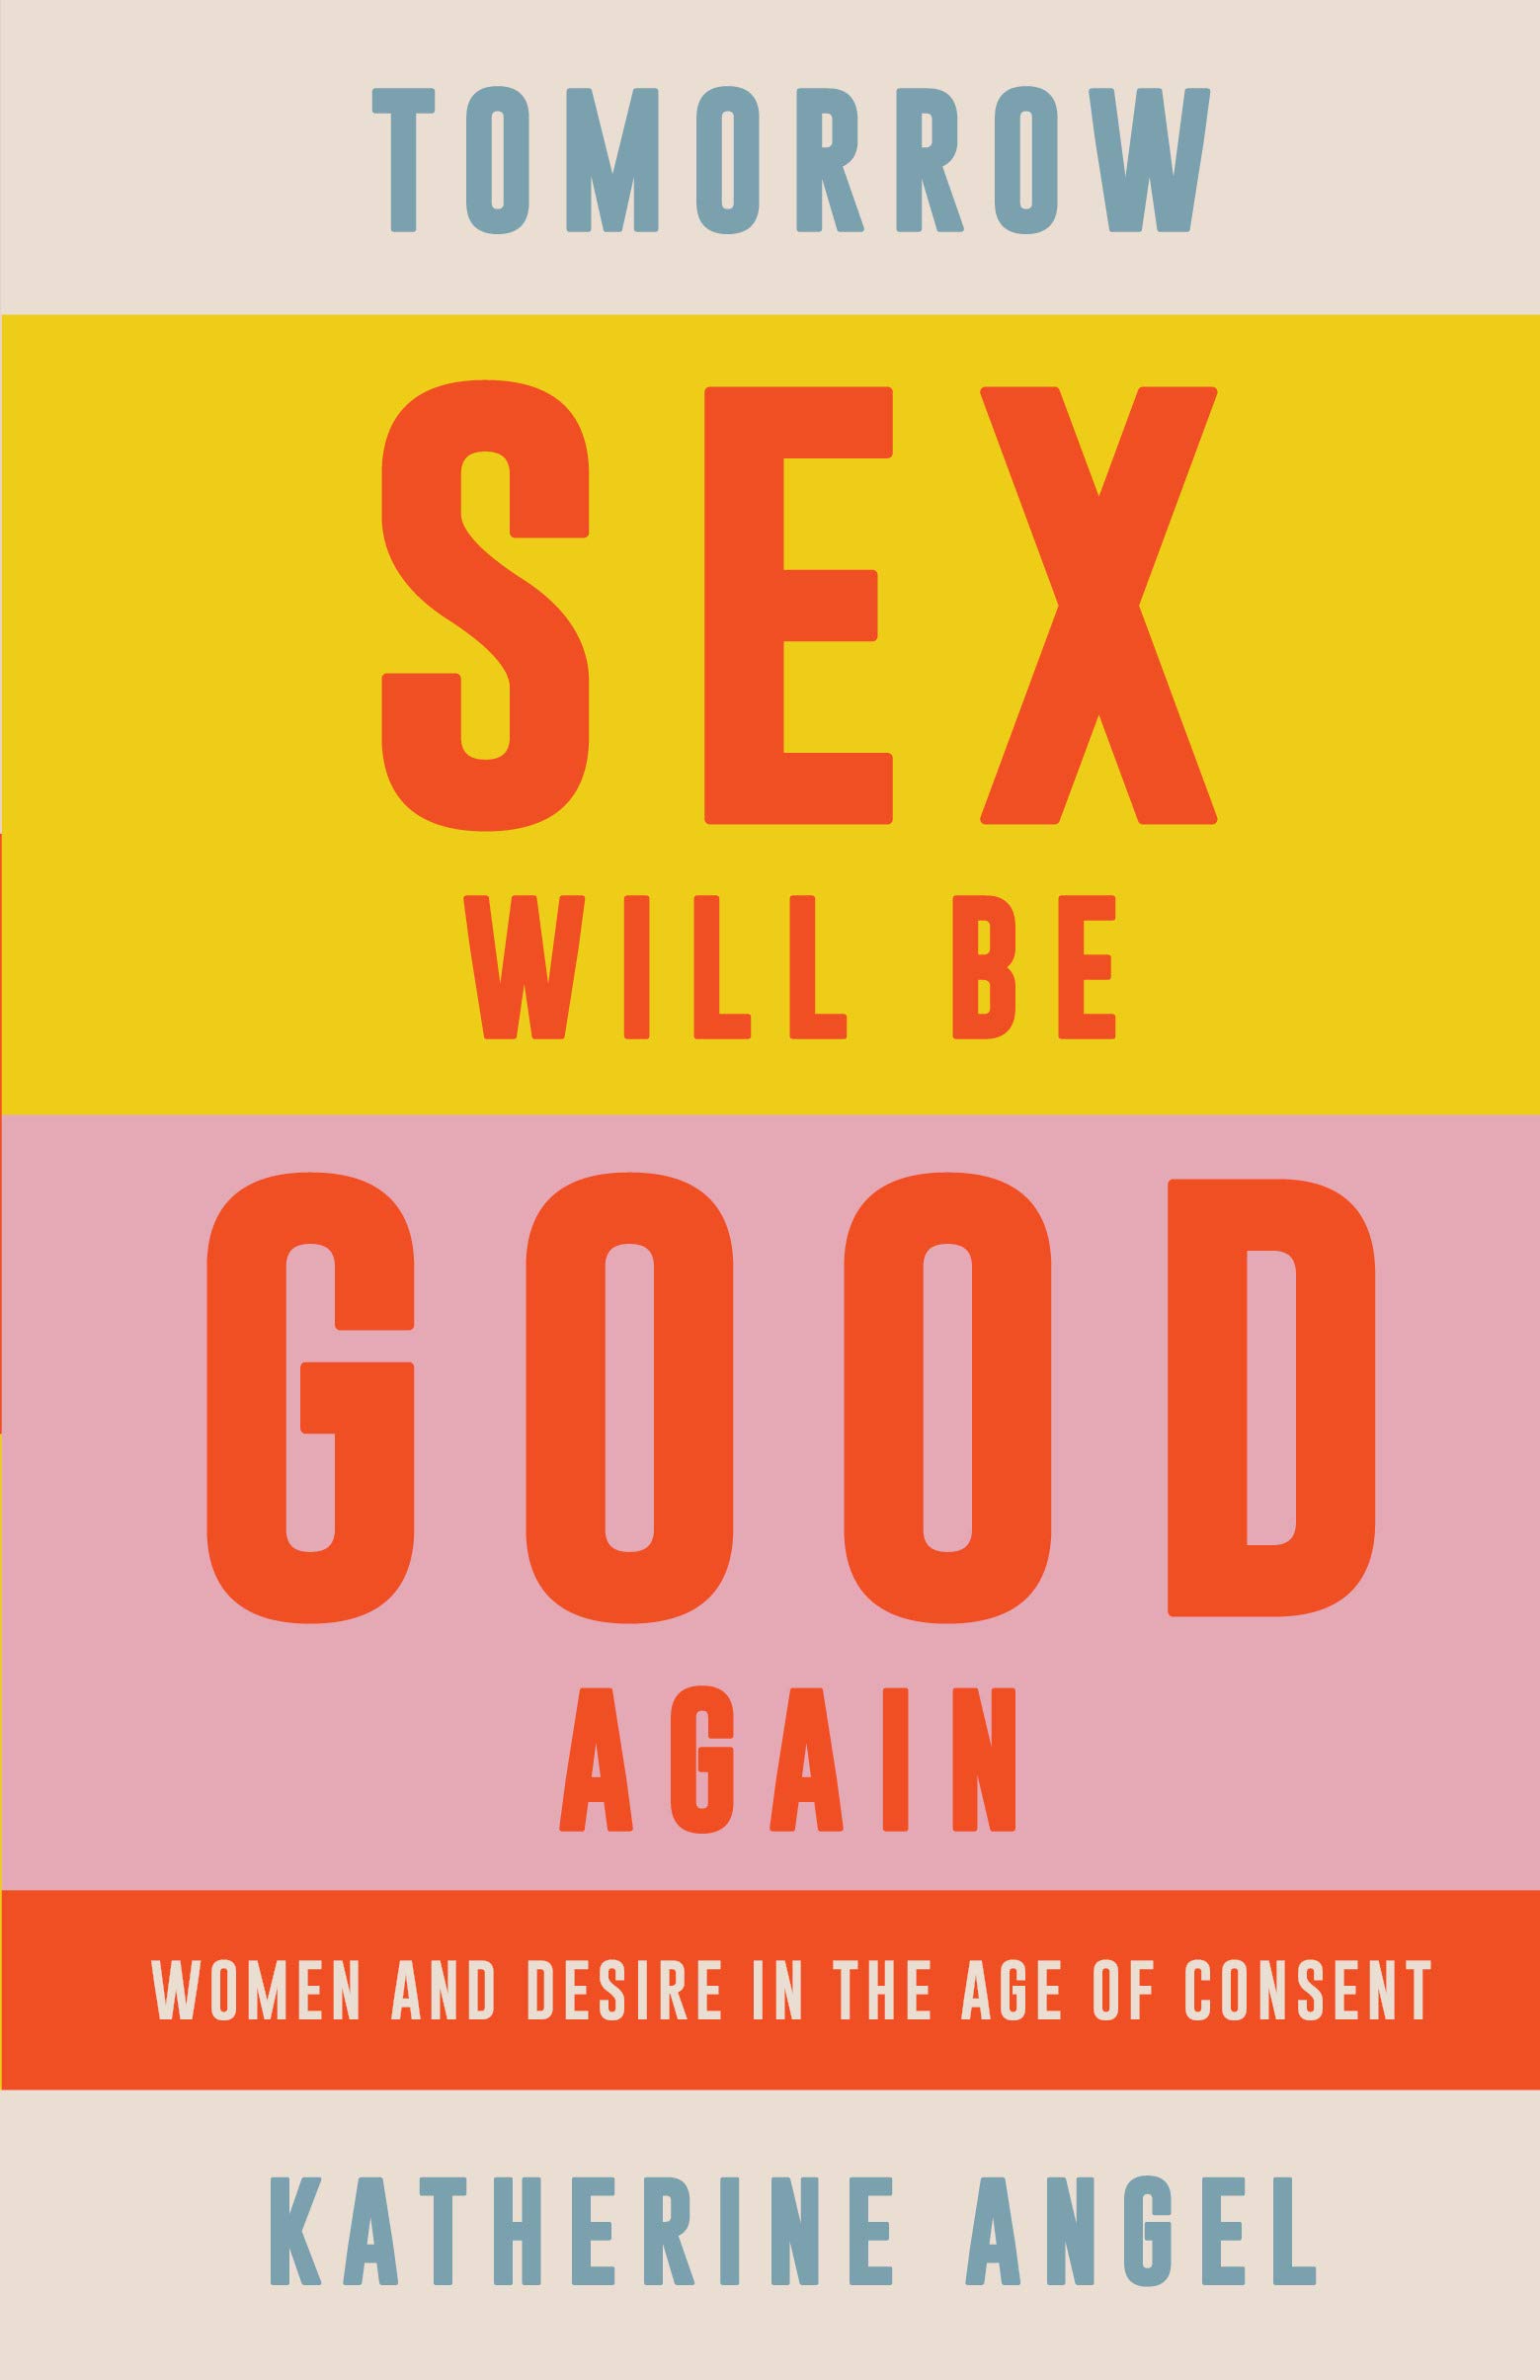 Cover of Tomorrow Sex Will Be Good Again: Women and Desire in the Age of Consent